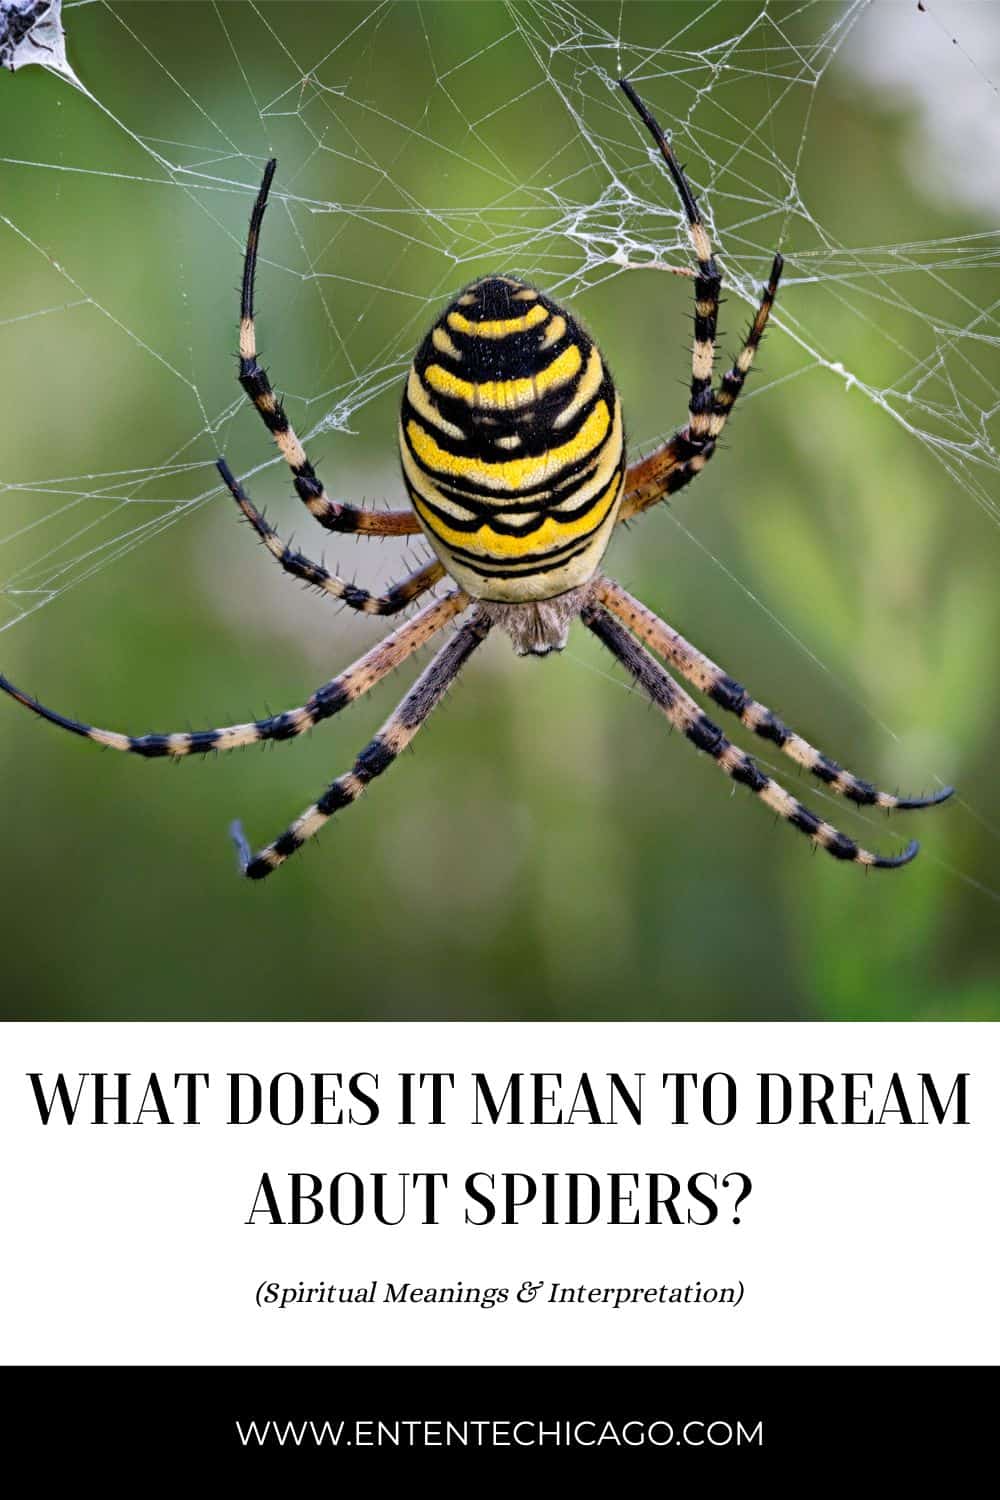 What Does It Mean To Dream About Spiders? (9 Spiritual Meanings)